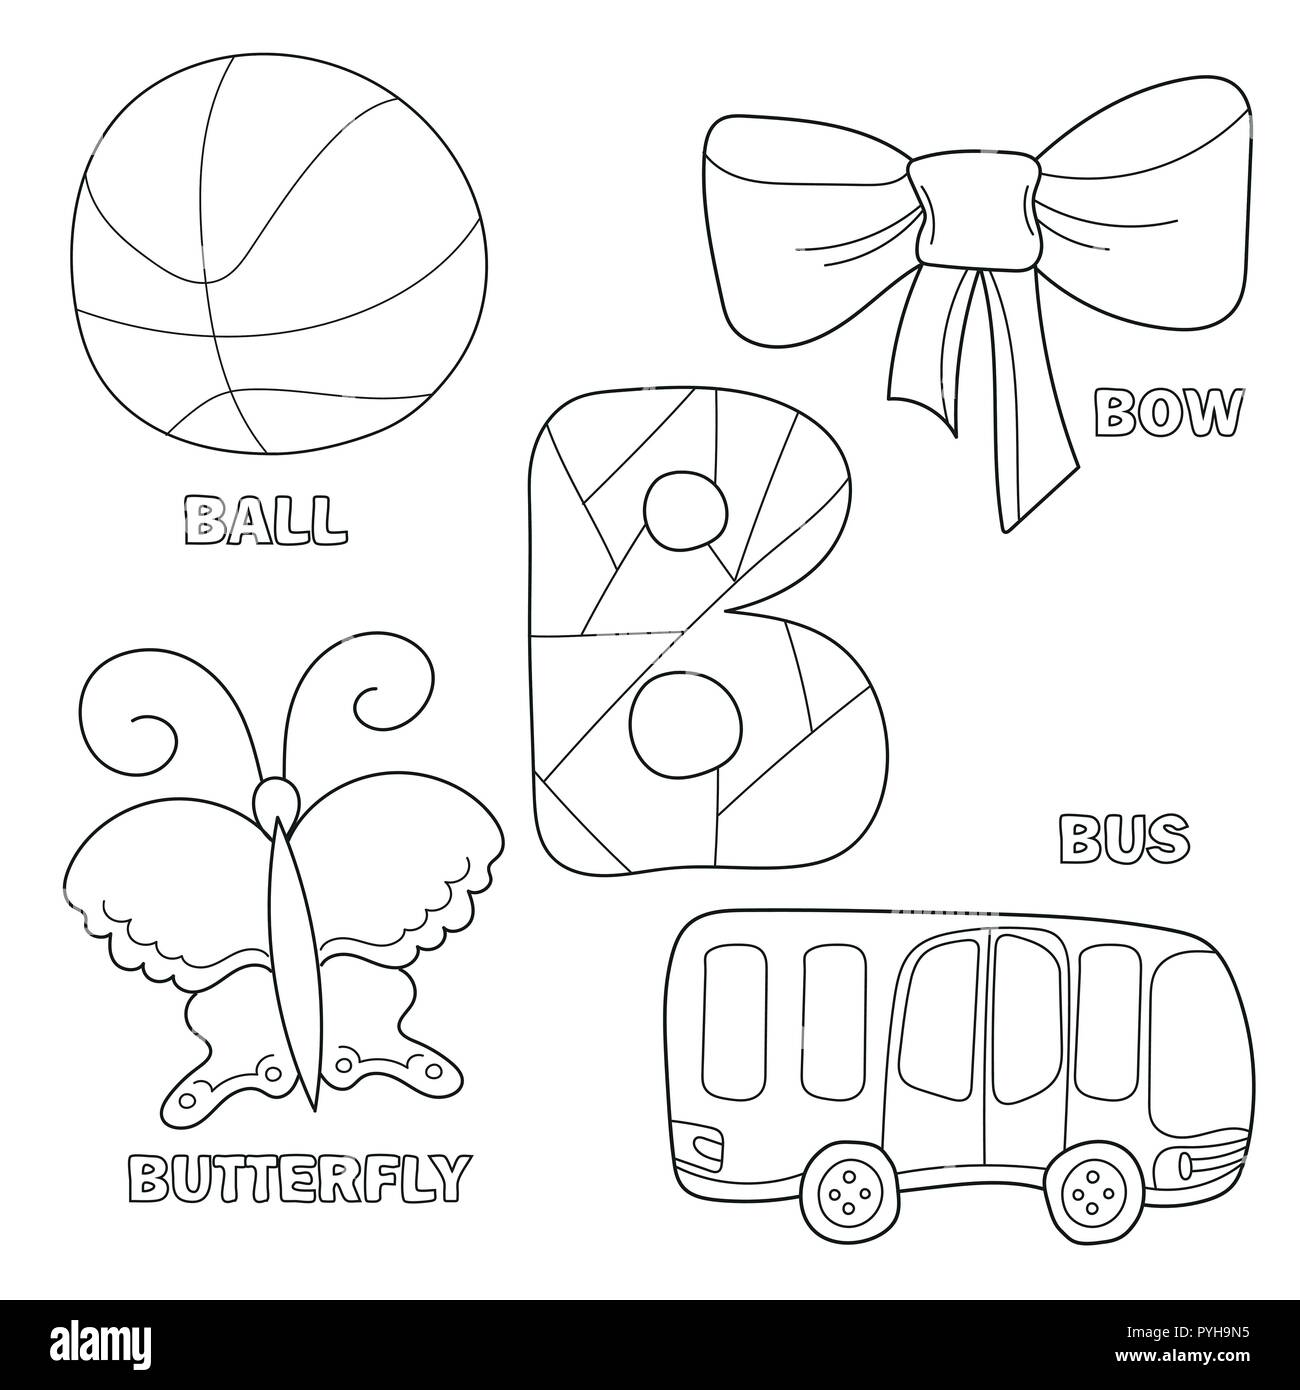 18 [pdf] LETTER B COLORING BOOK PAGES PRINTABLE and DOCX DOWNLOAD ZIP